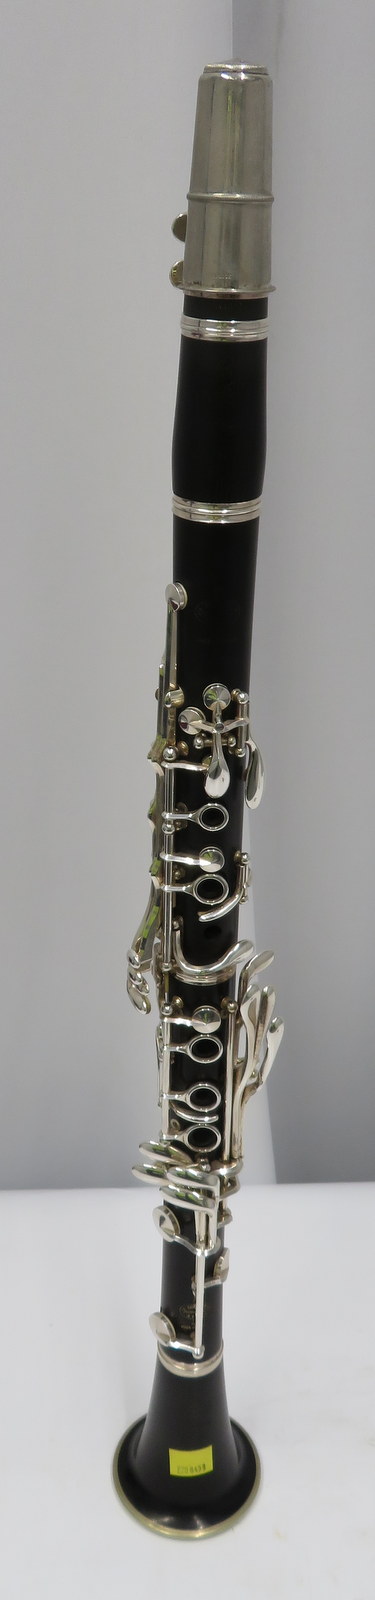 Buffet Crampon R13 clarinet with case. Serial number: 654916. - Image 3 of 18